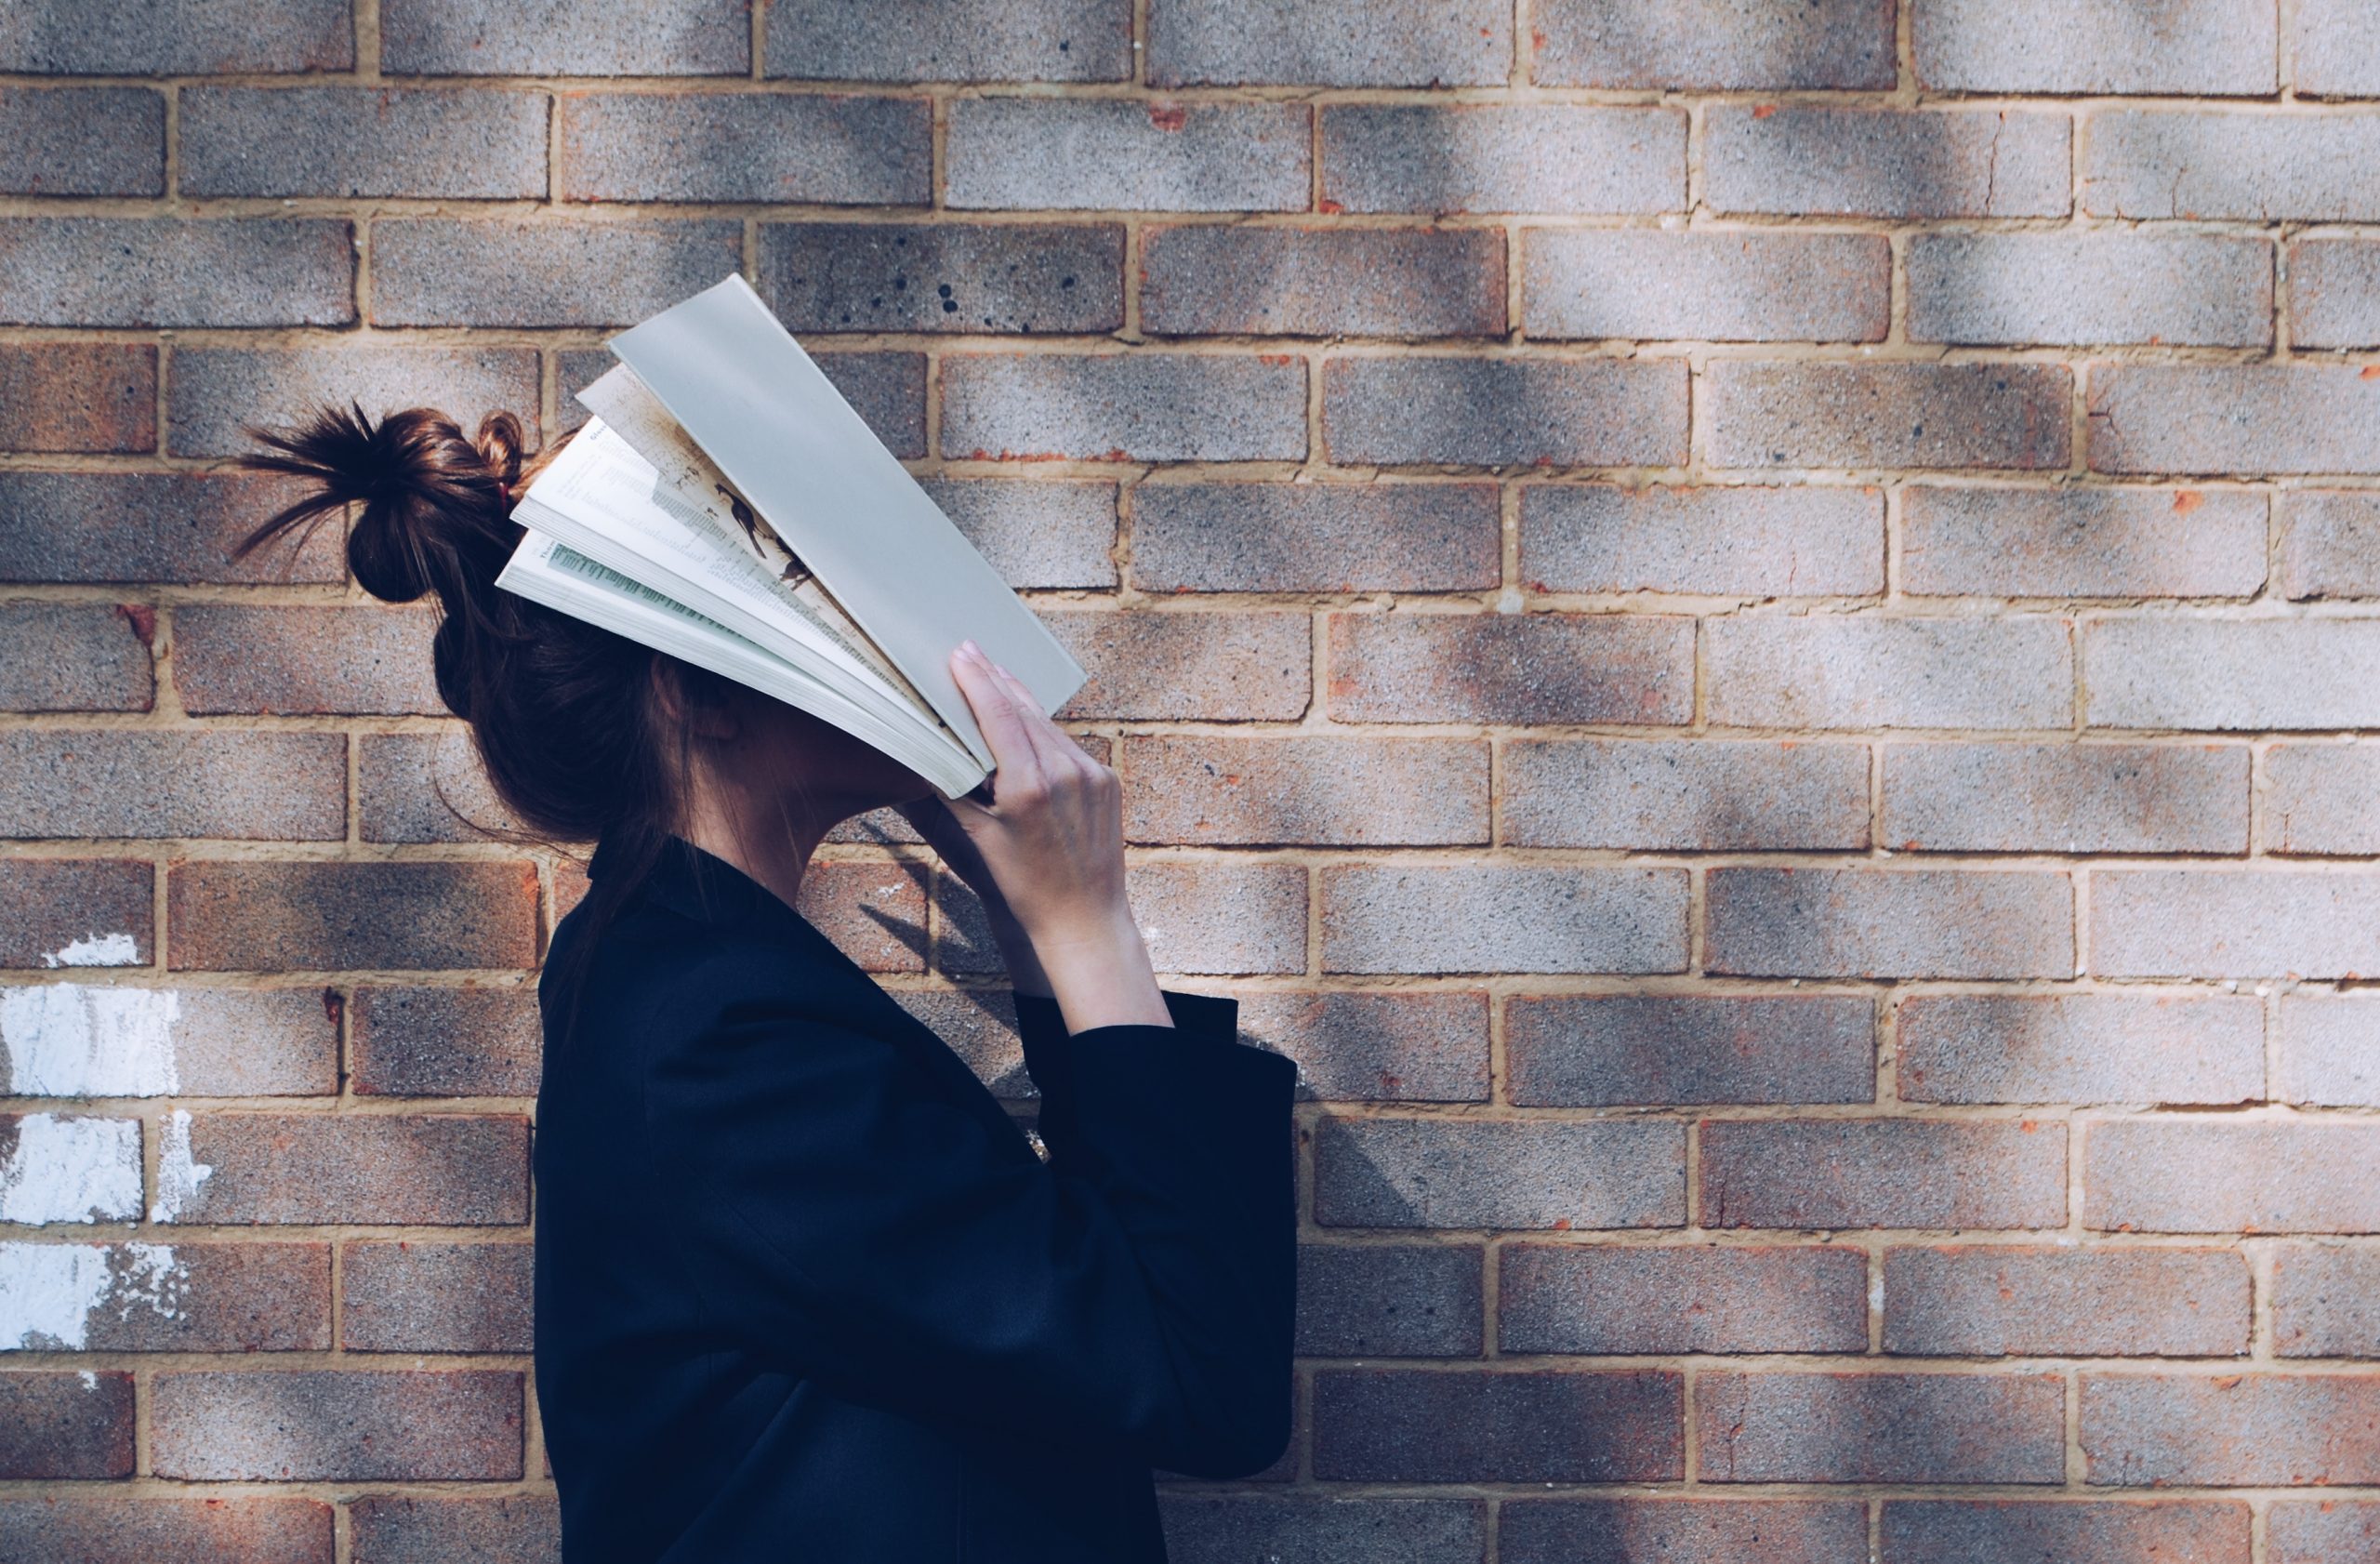 Girl standing by brick wall with open book covering her face